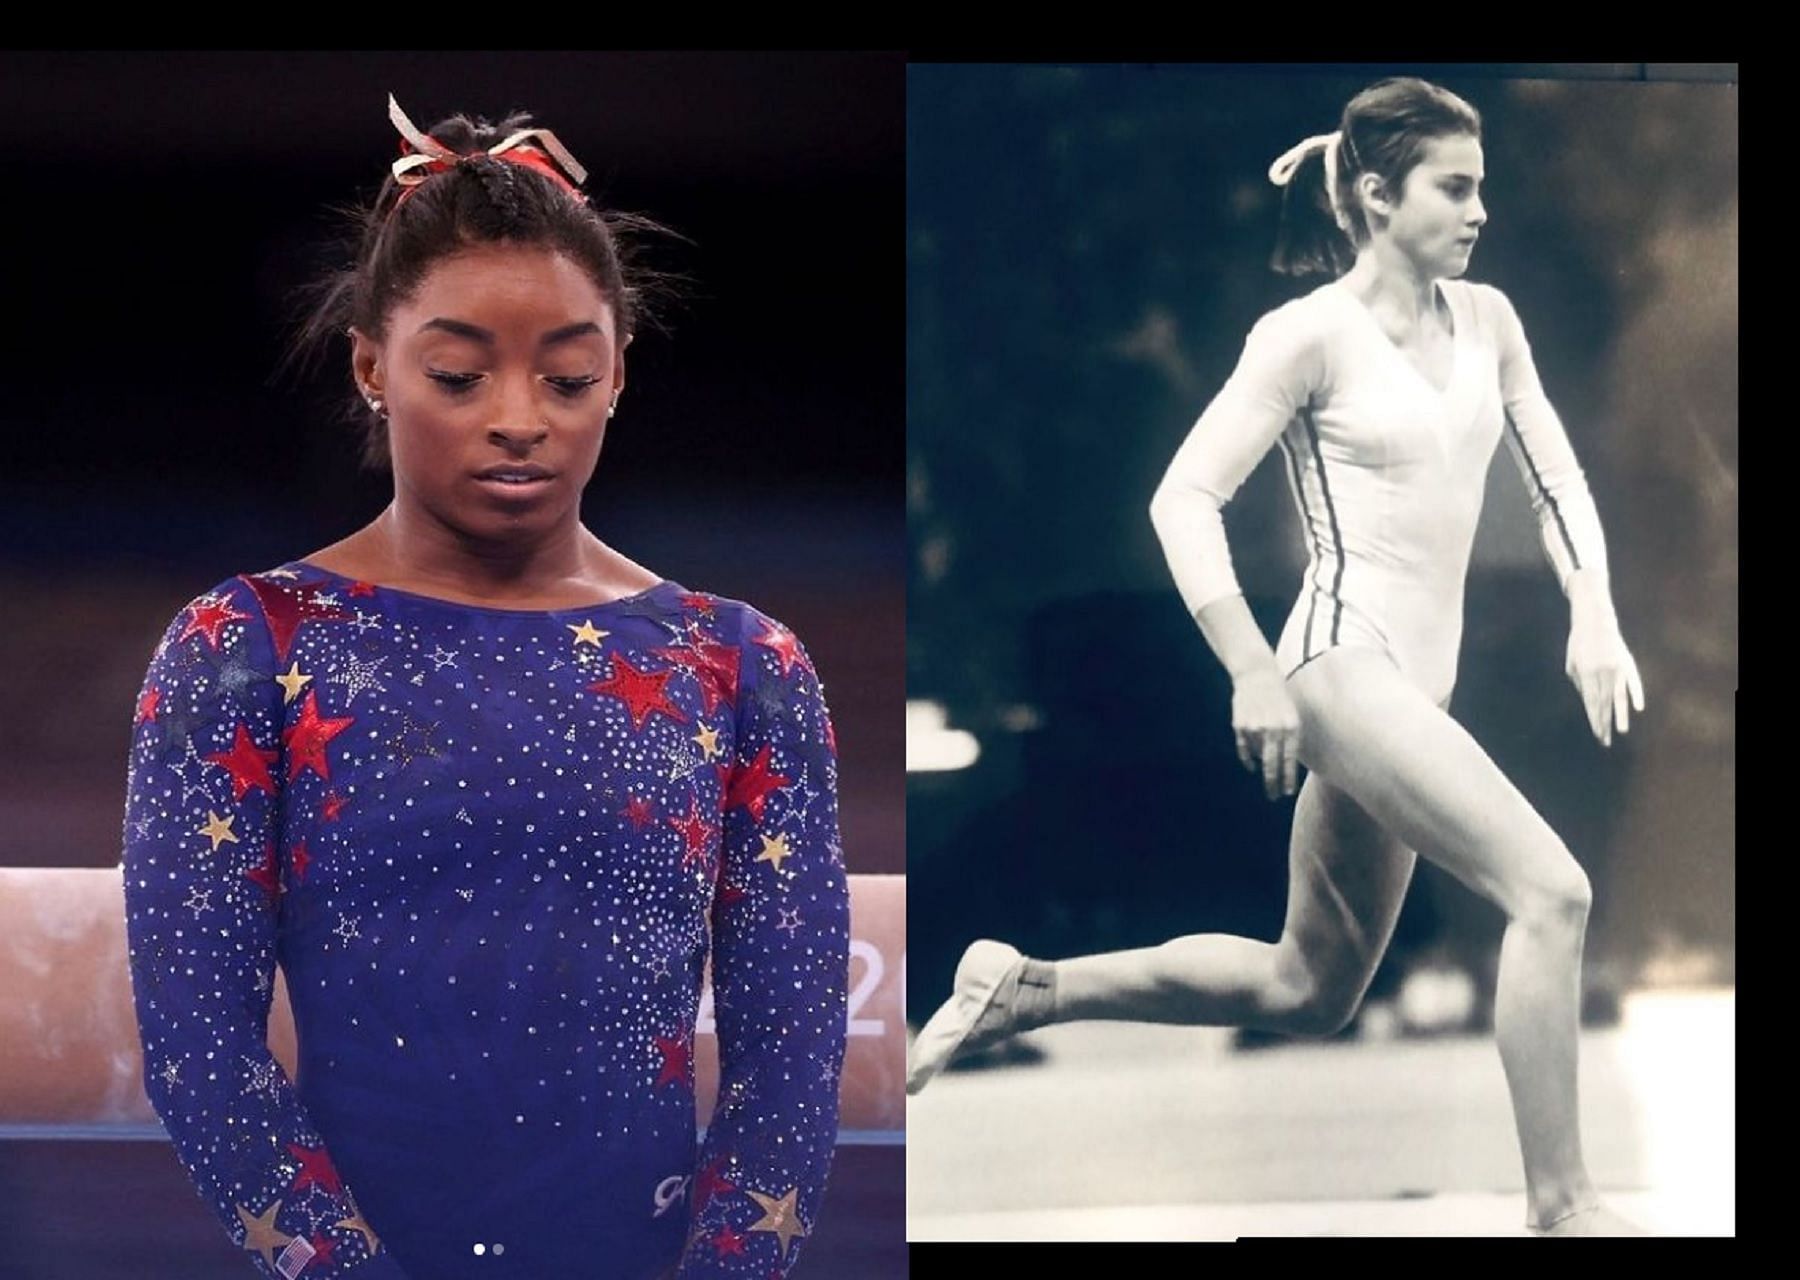 Who Is The Better Gymnast Between Nadia Comaneci And Simone Biles